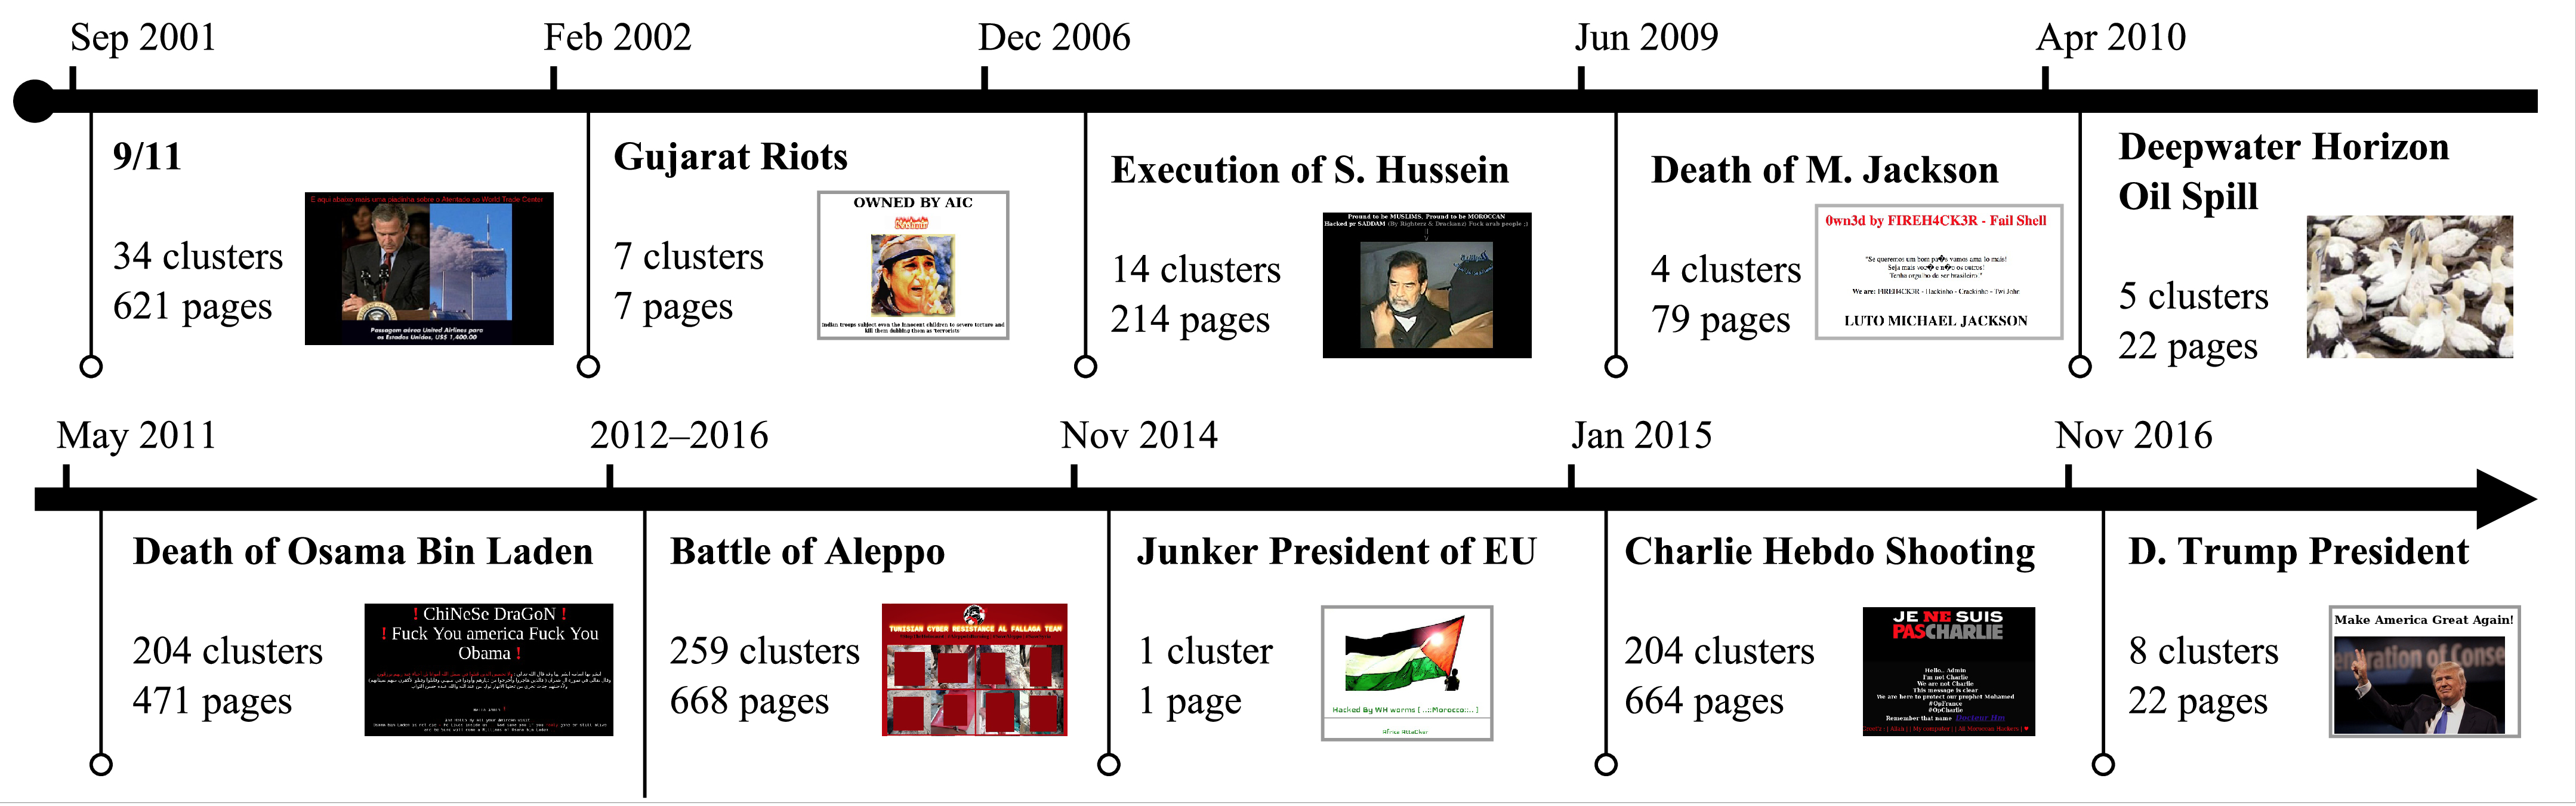 Timeline of real world events for which we have found evidence in web-deface pages.